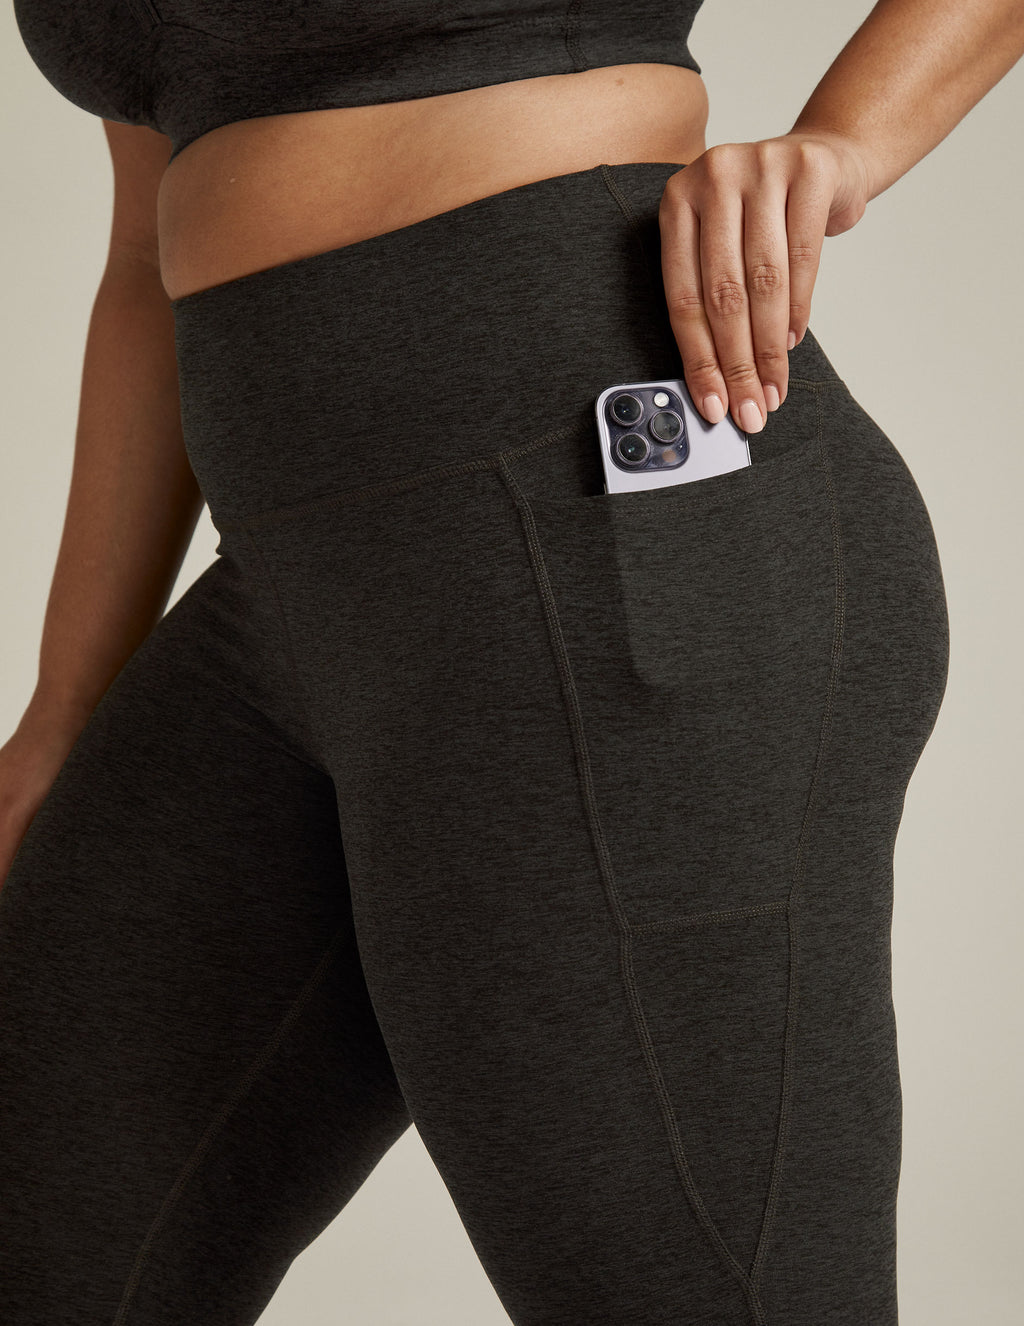 Spacedye Out Of Pocket High Waisted Capri Legging Featured Image